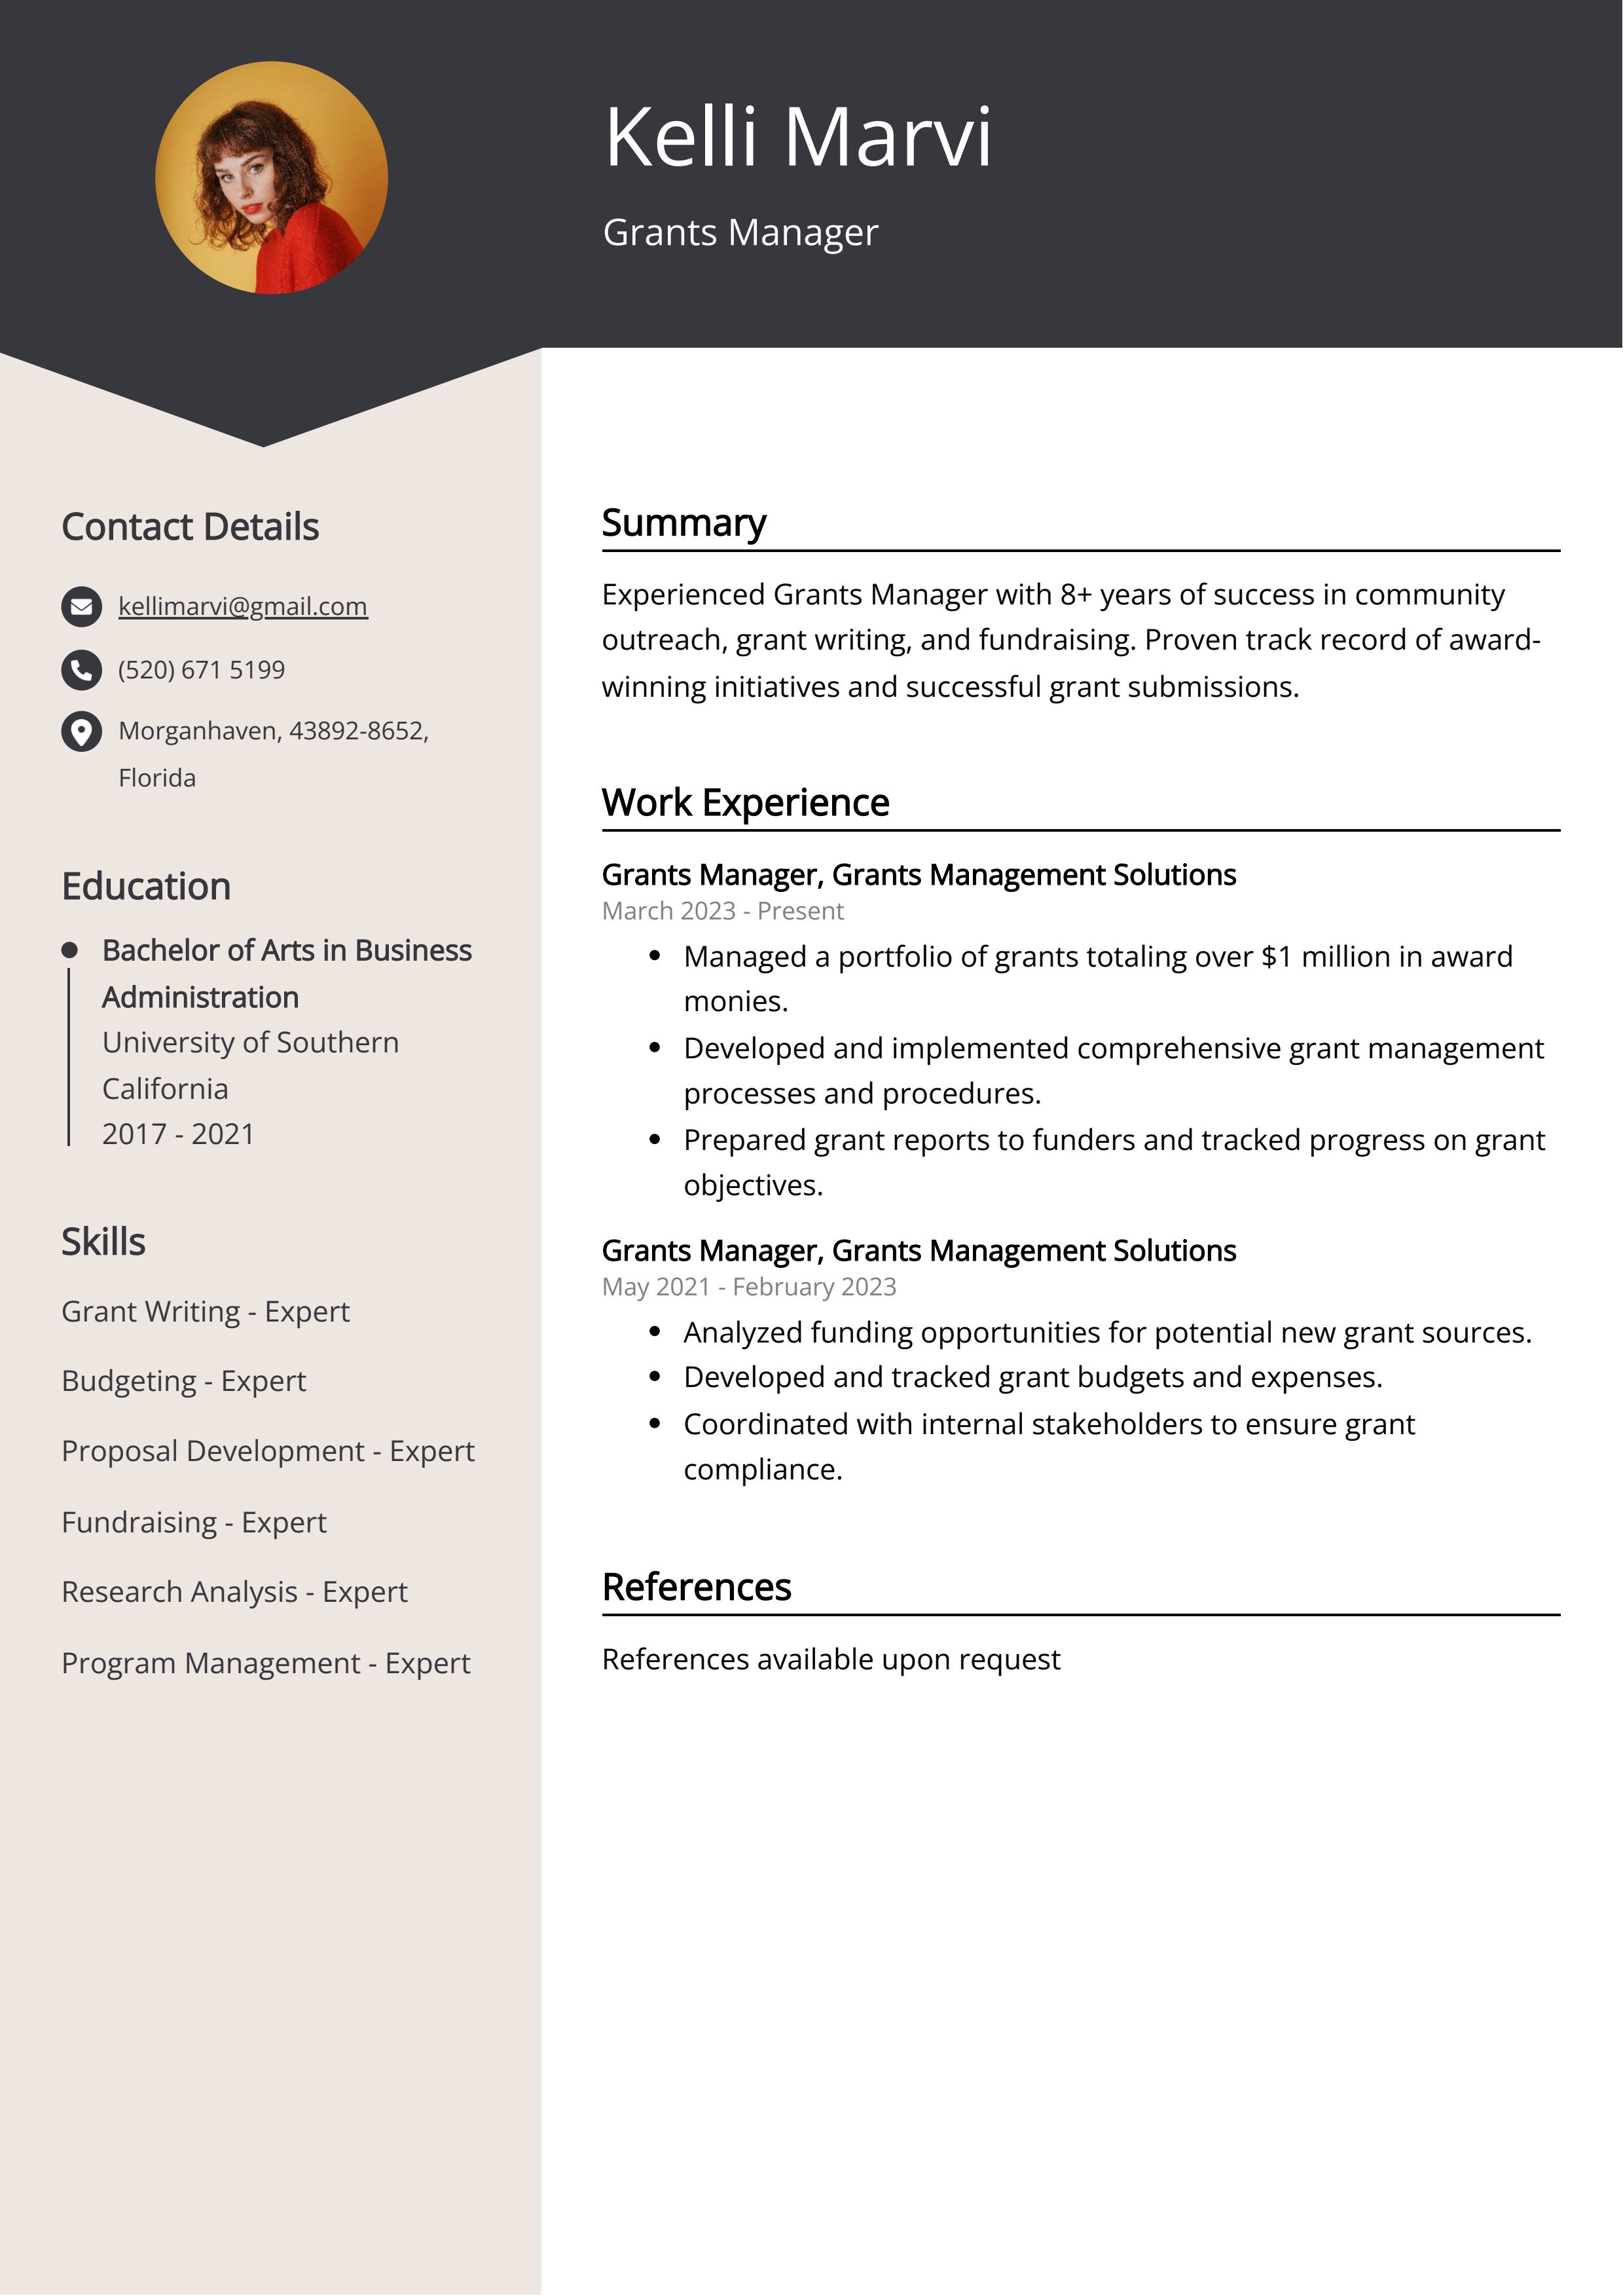 Grants Manager CV Example